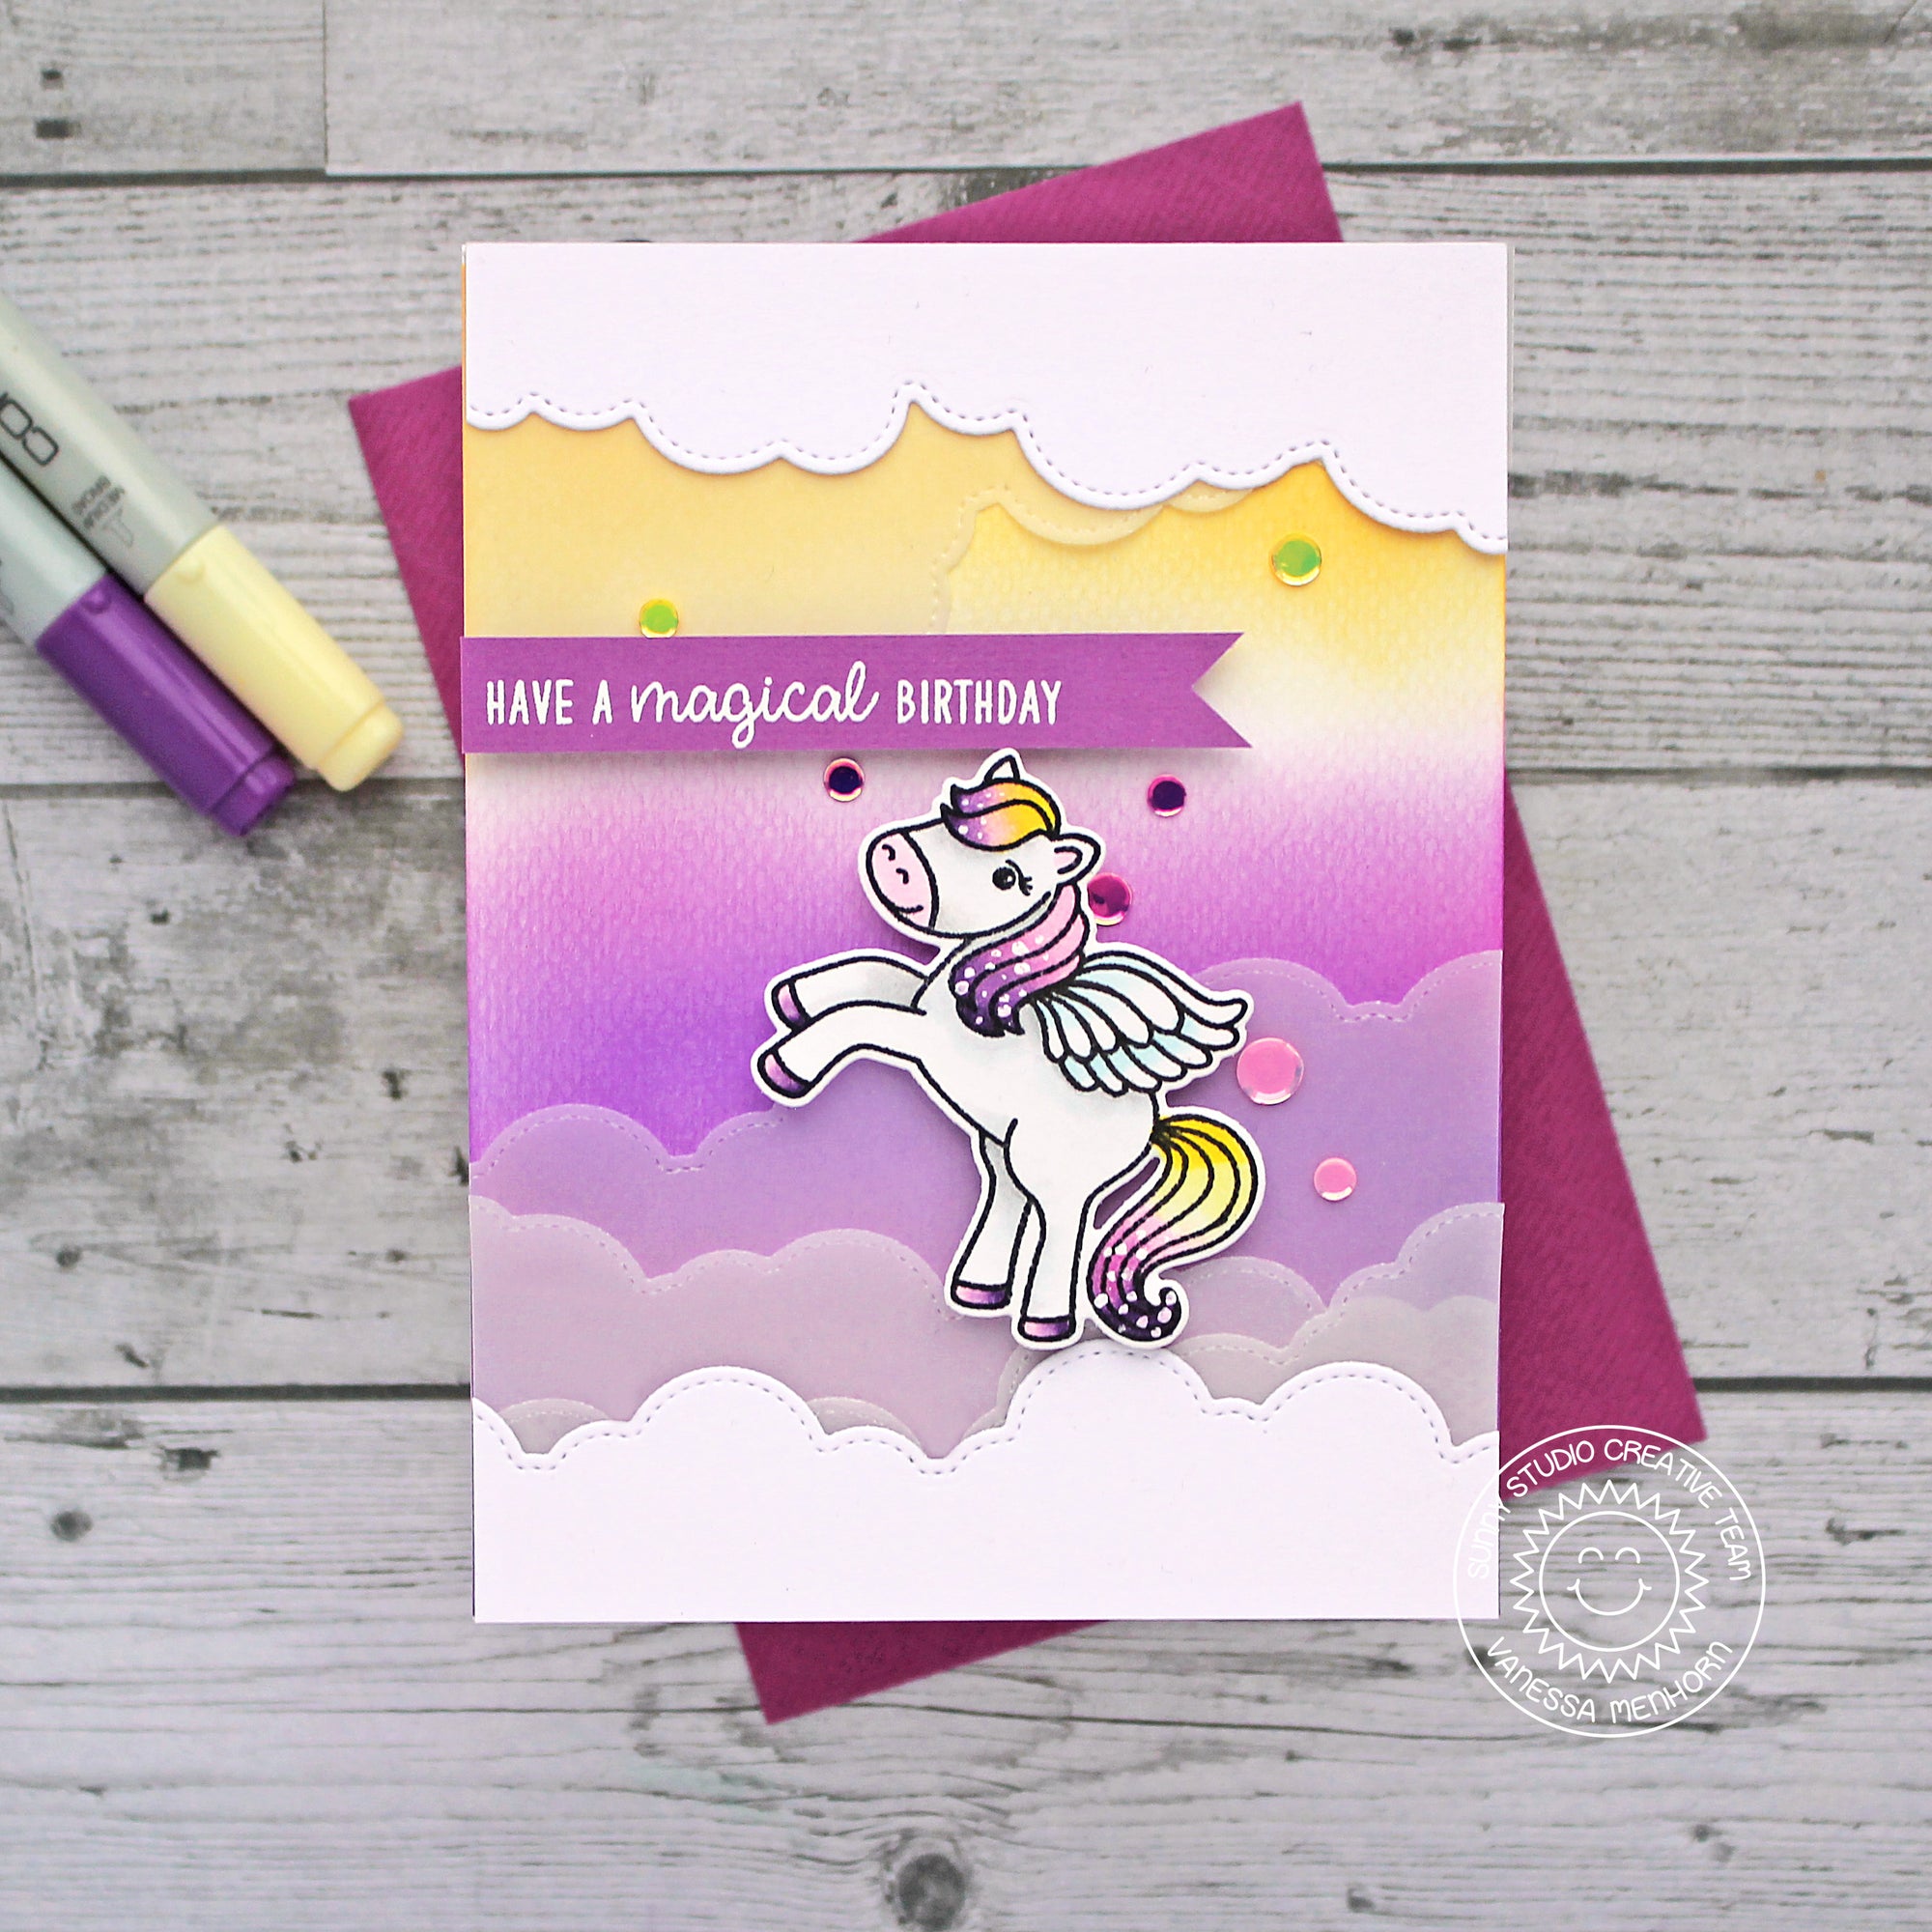 Sunny Studio Stamps Have A Magical Birthday Purple & Yellow Ombre Pegasus Handmade Card (using Stitched Fluffy Cloud Border Dies)